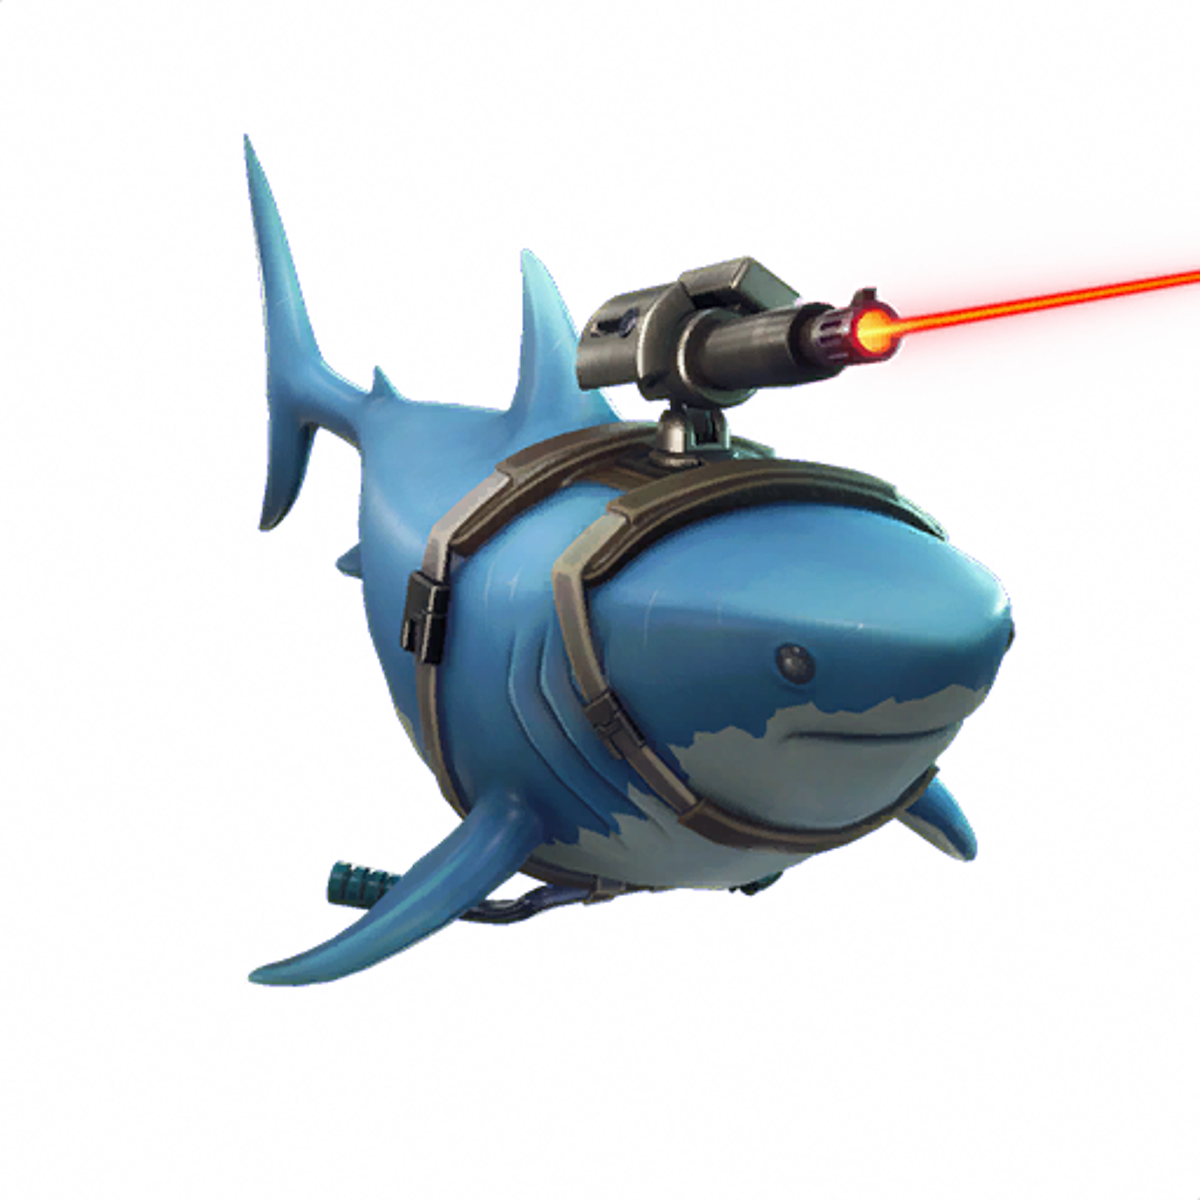 Fortnite is adding Praise the Sun and Sharks with Lasers from the